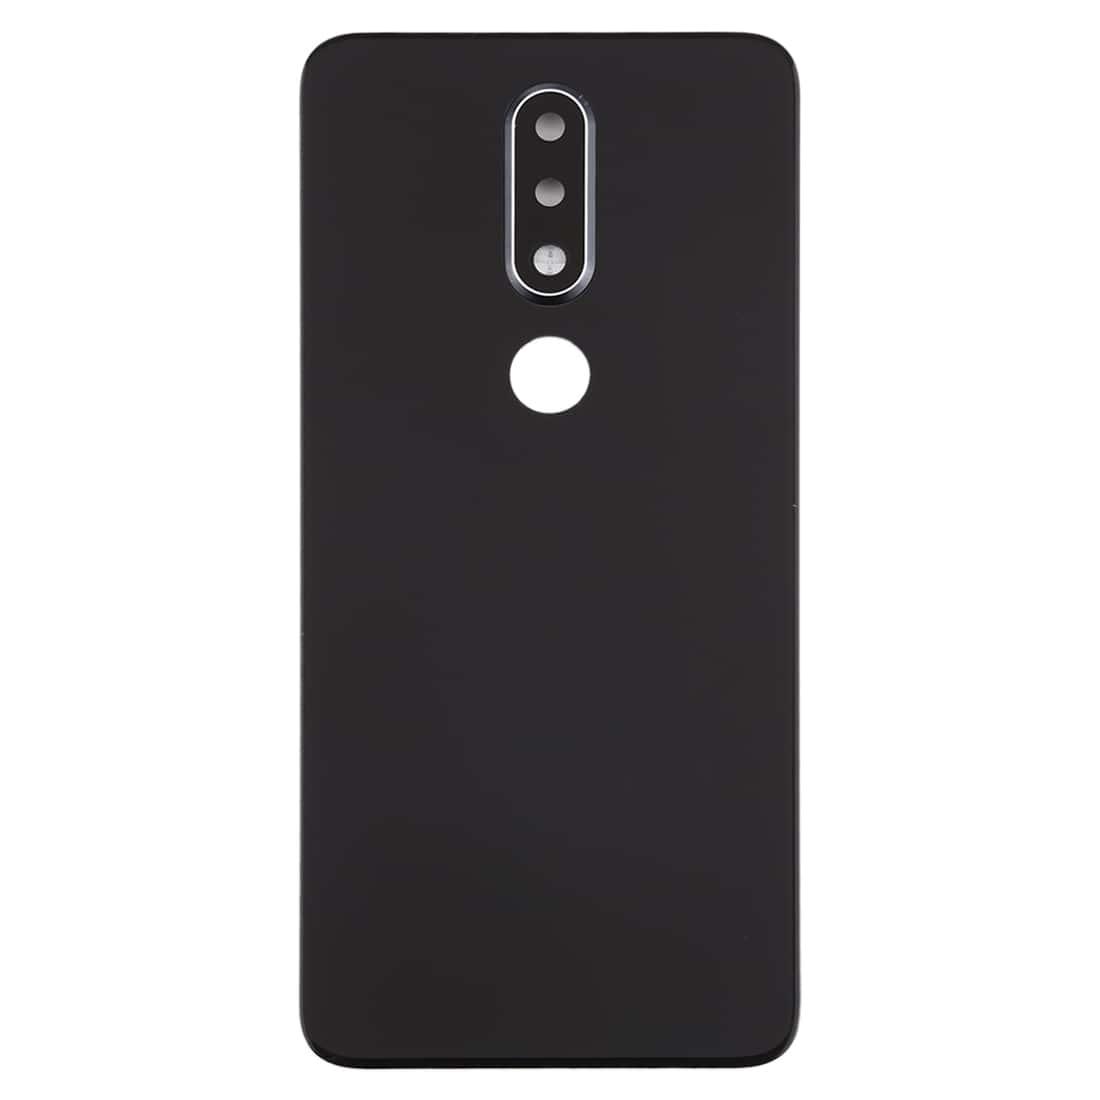 Back Glass Panel for Nokia X6 2018 6.1 Plus Black with Camera Lens